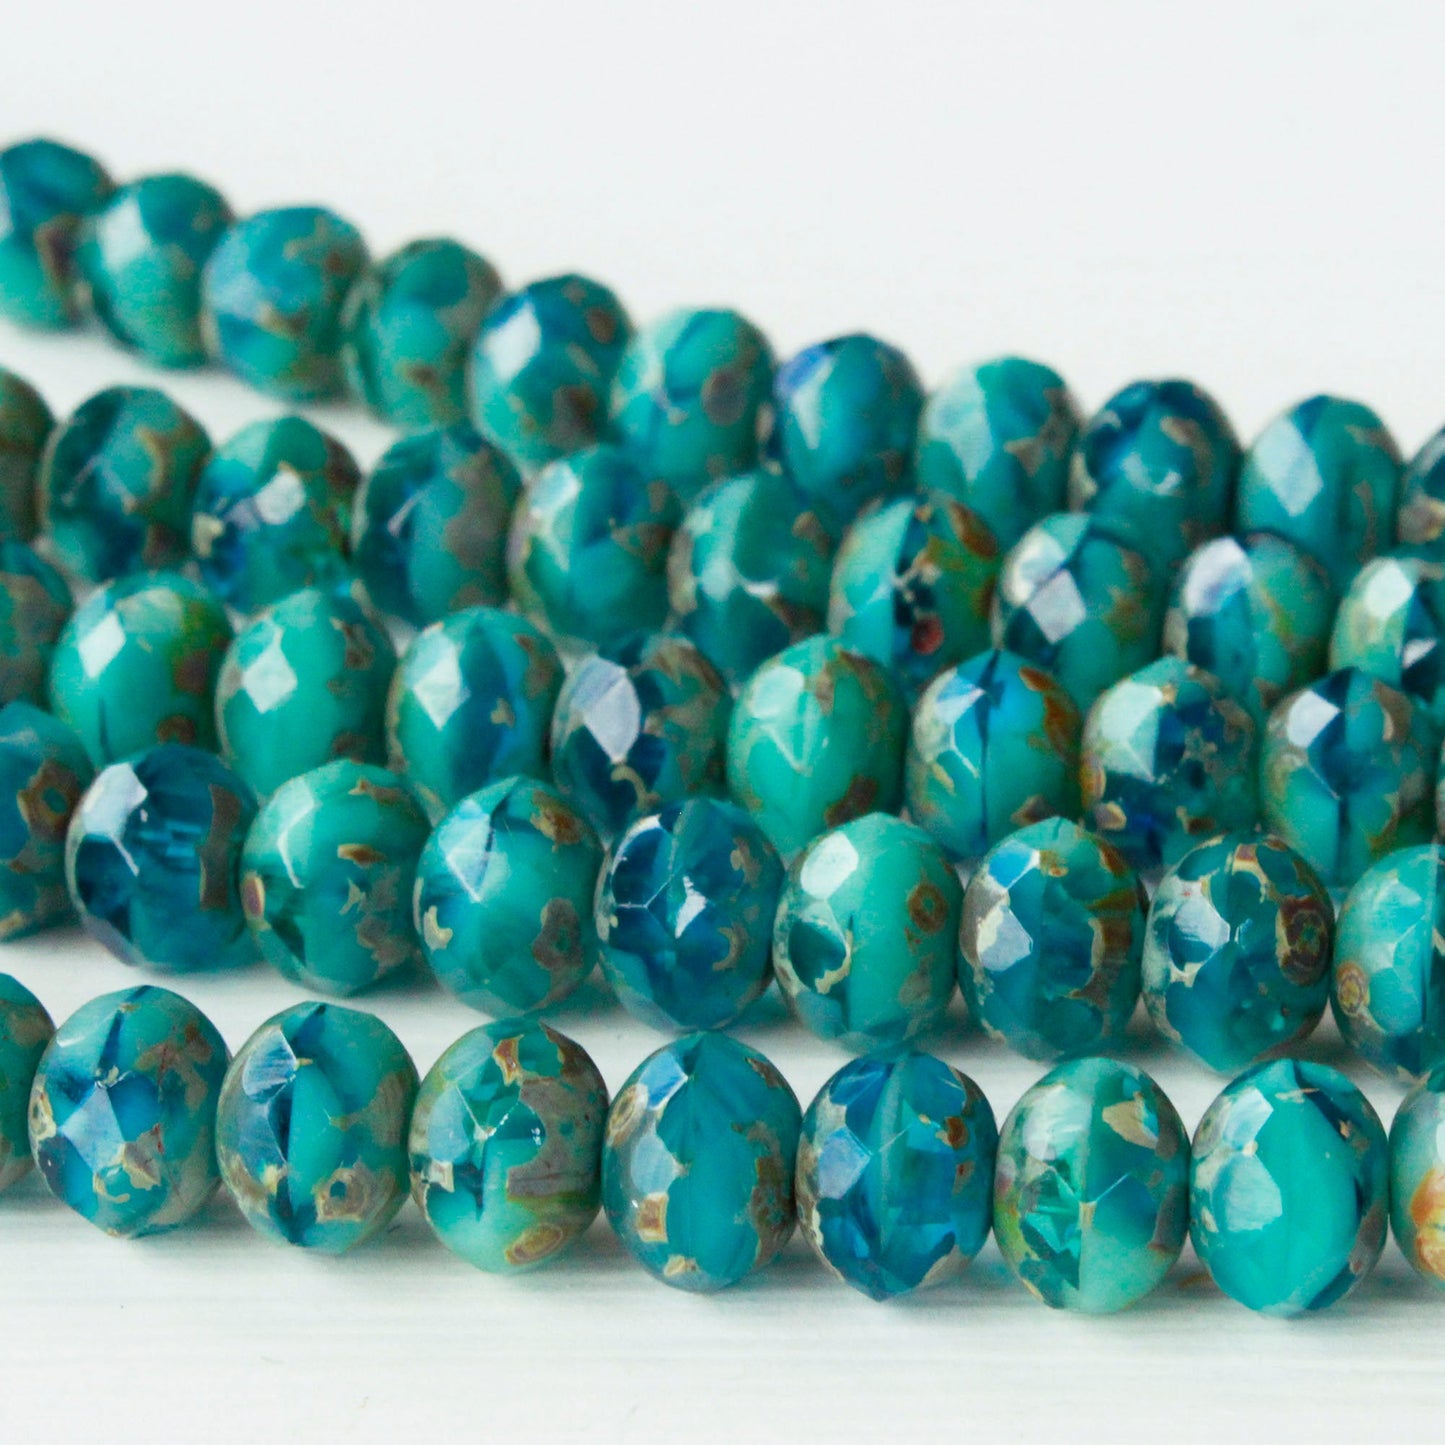 5x7mm Rondelle Beads - Turquoise Blue Mix Picasso -  24 Beads